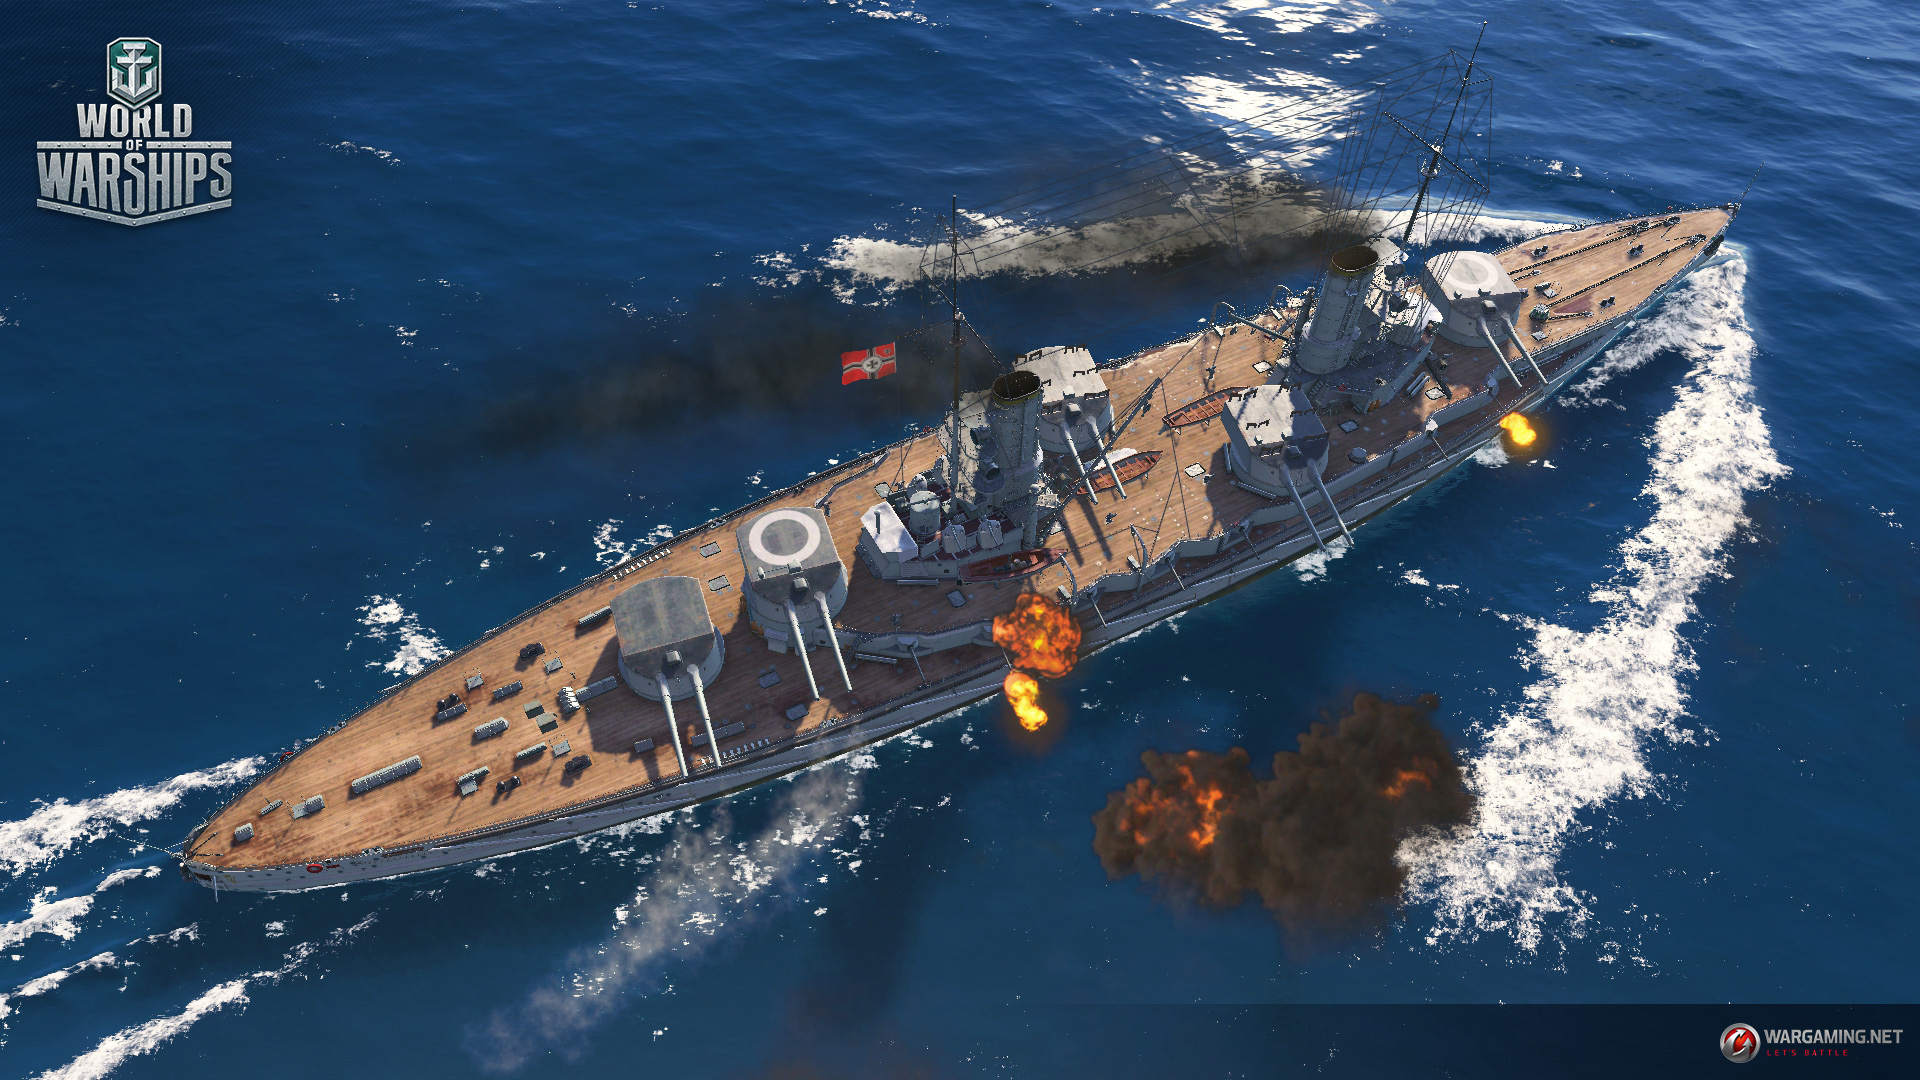 which starter ship is the best in world of warships